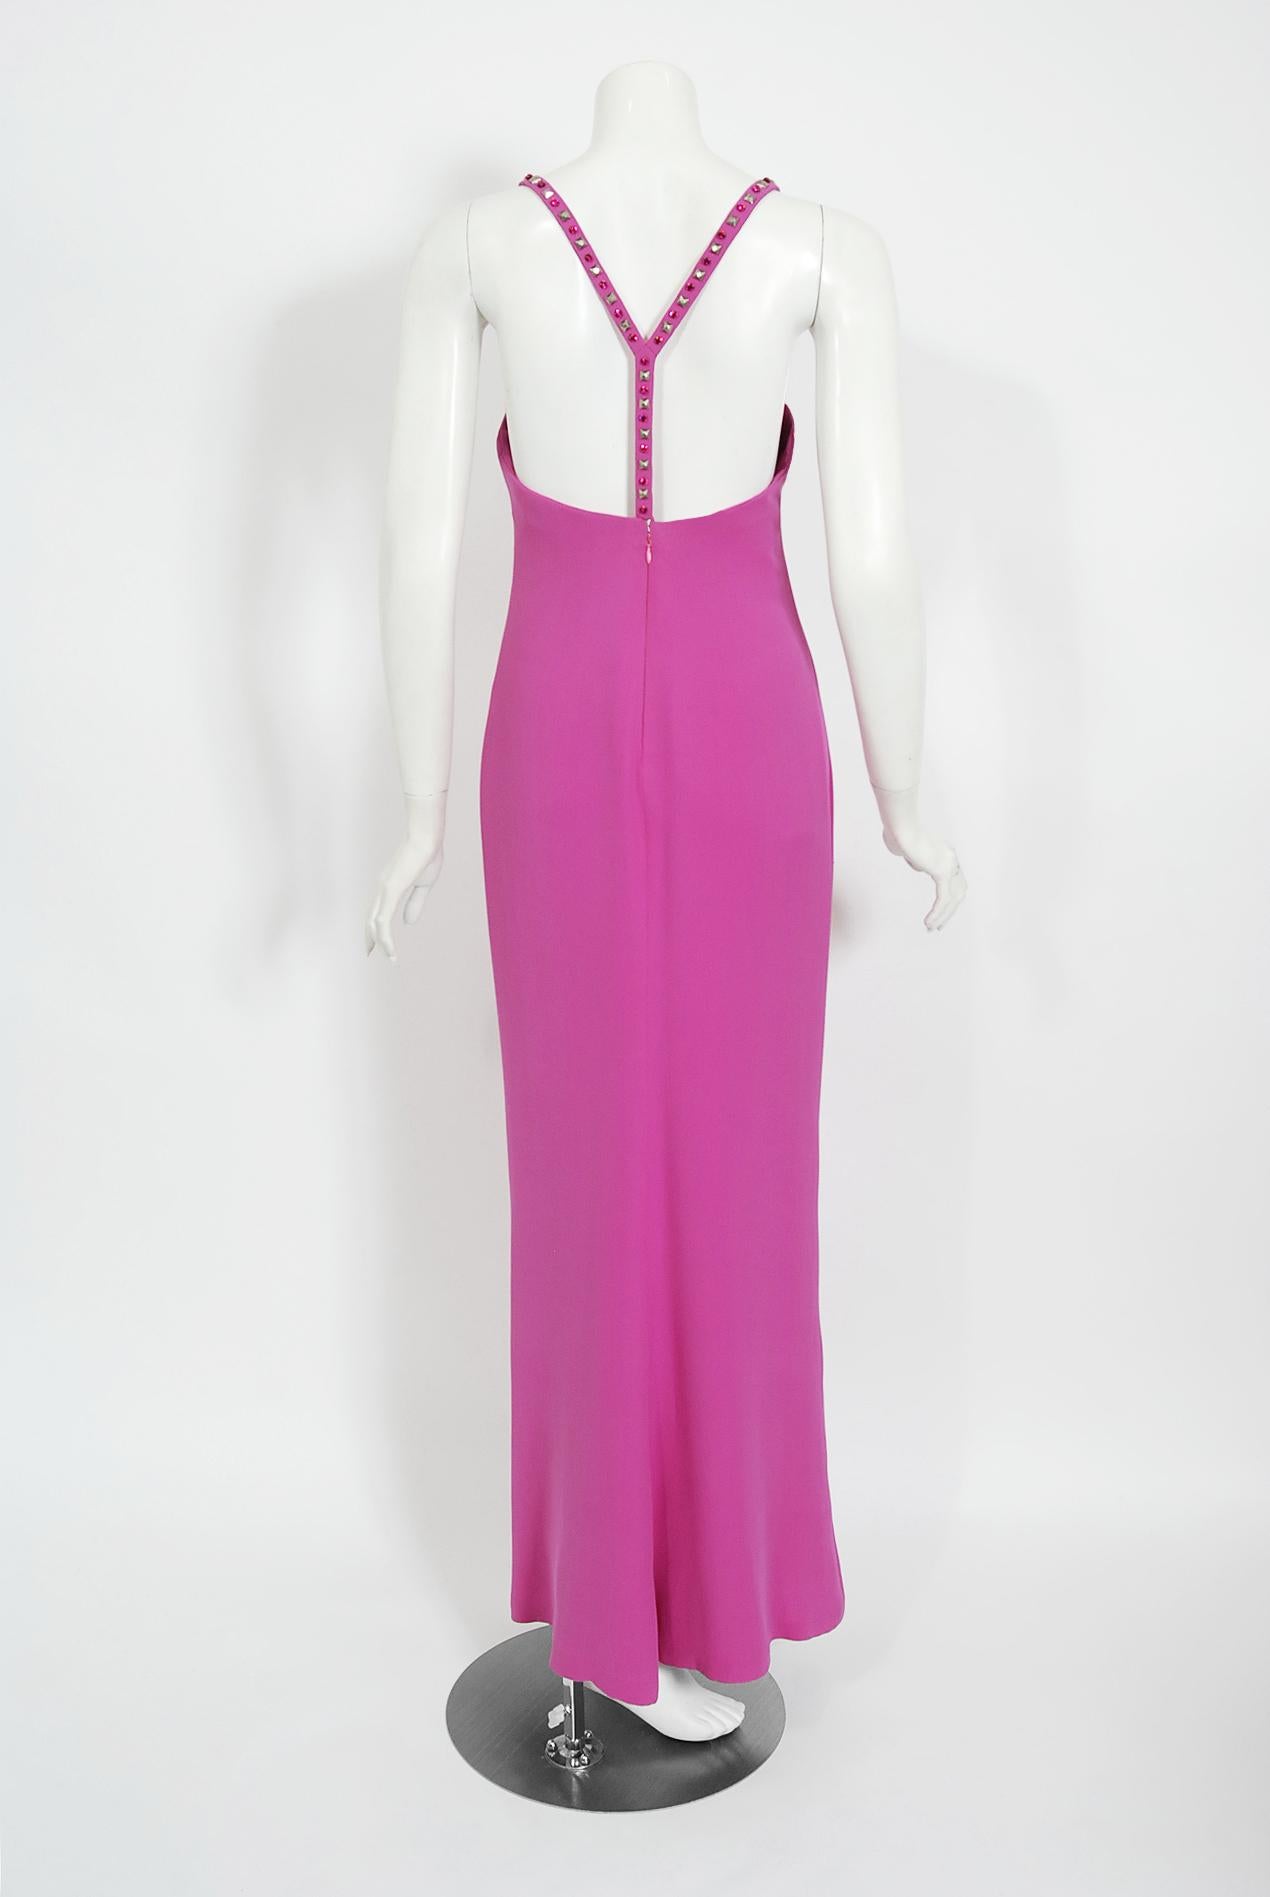 Women's Vintage 1998 Gianni Versace Couture Fuchsia Silk Studded Low-Cut Hourglass Gown